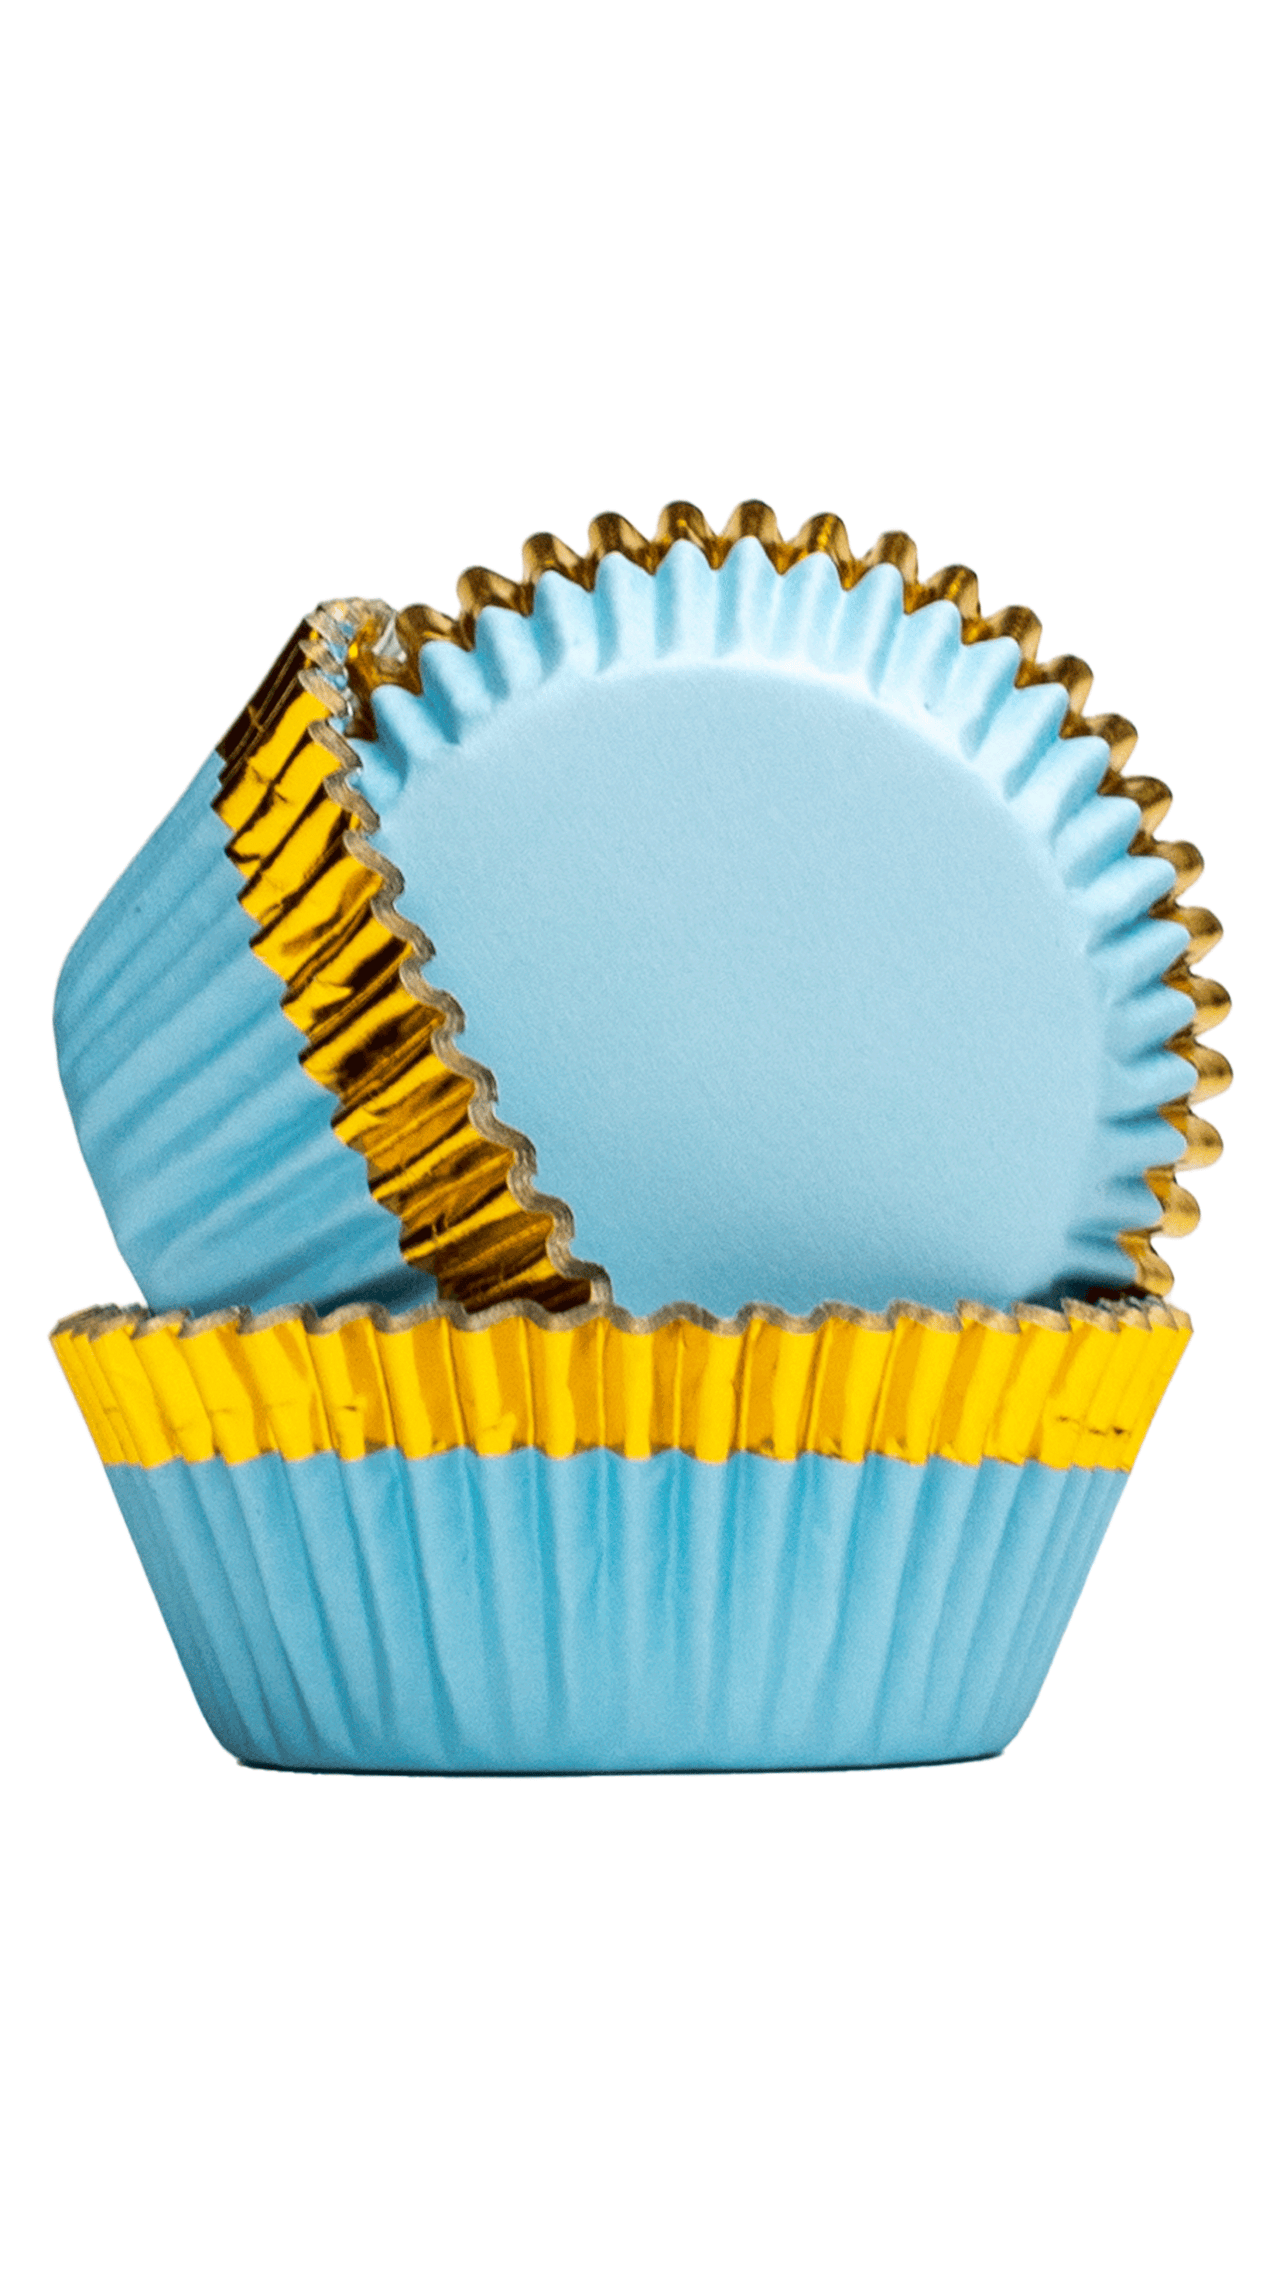 PME - Cupcake Cases - Blue with Gold Trim - 30 Pack Cupcake Cases PME